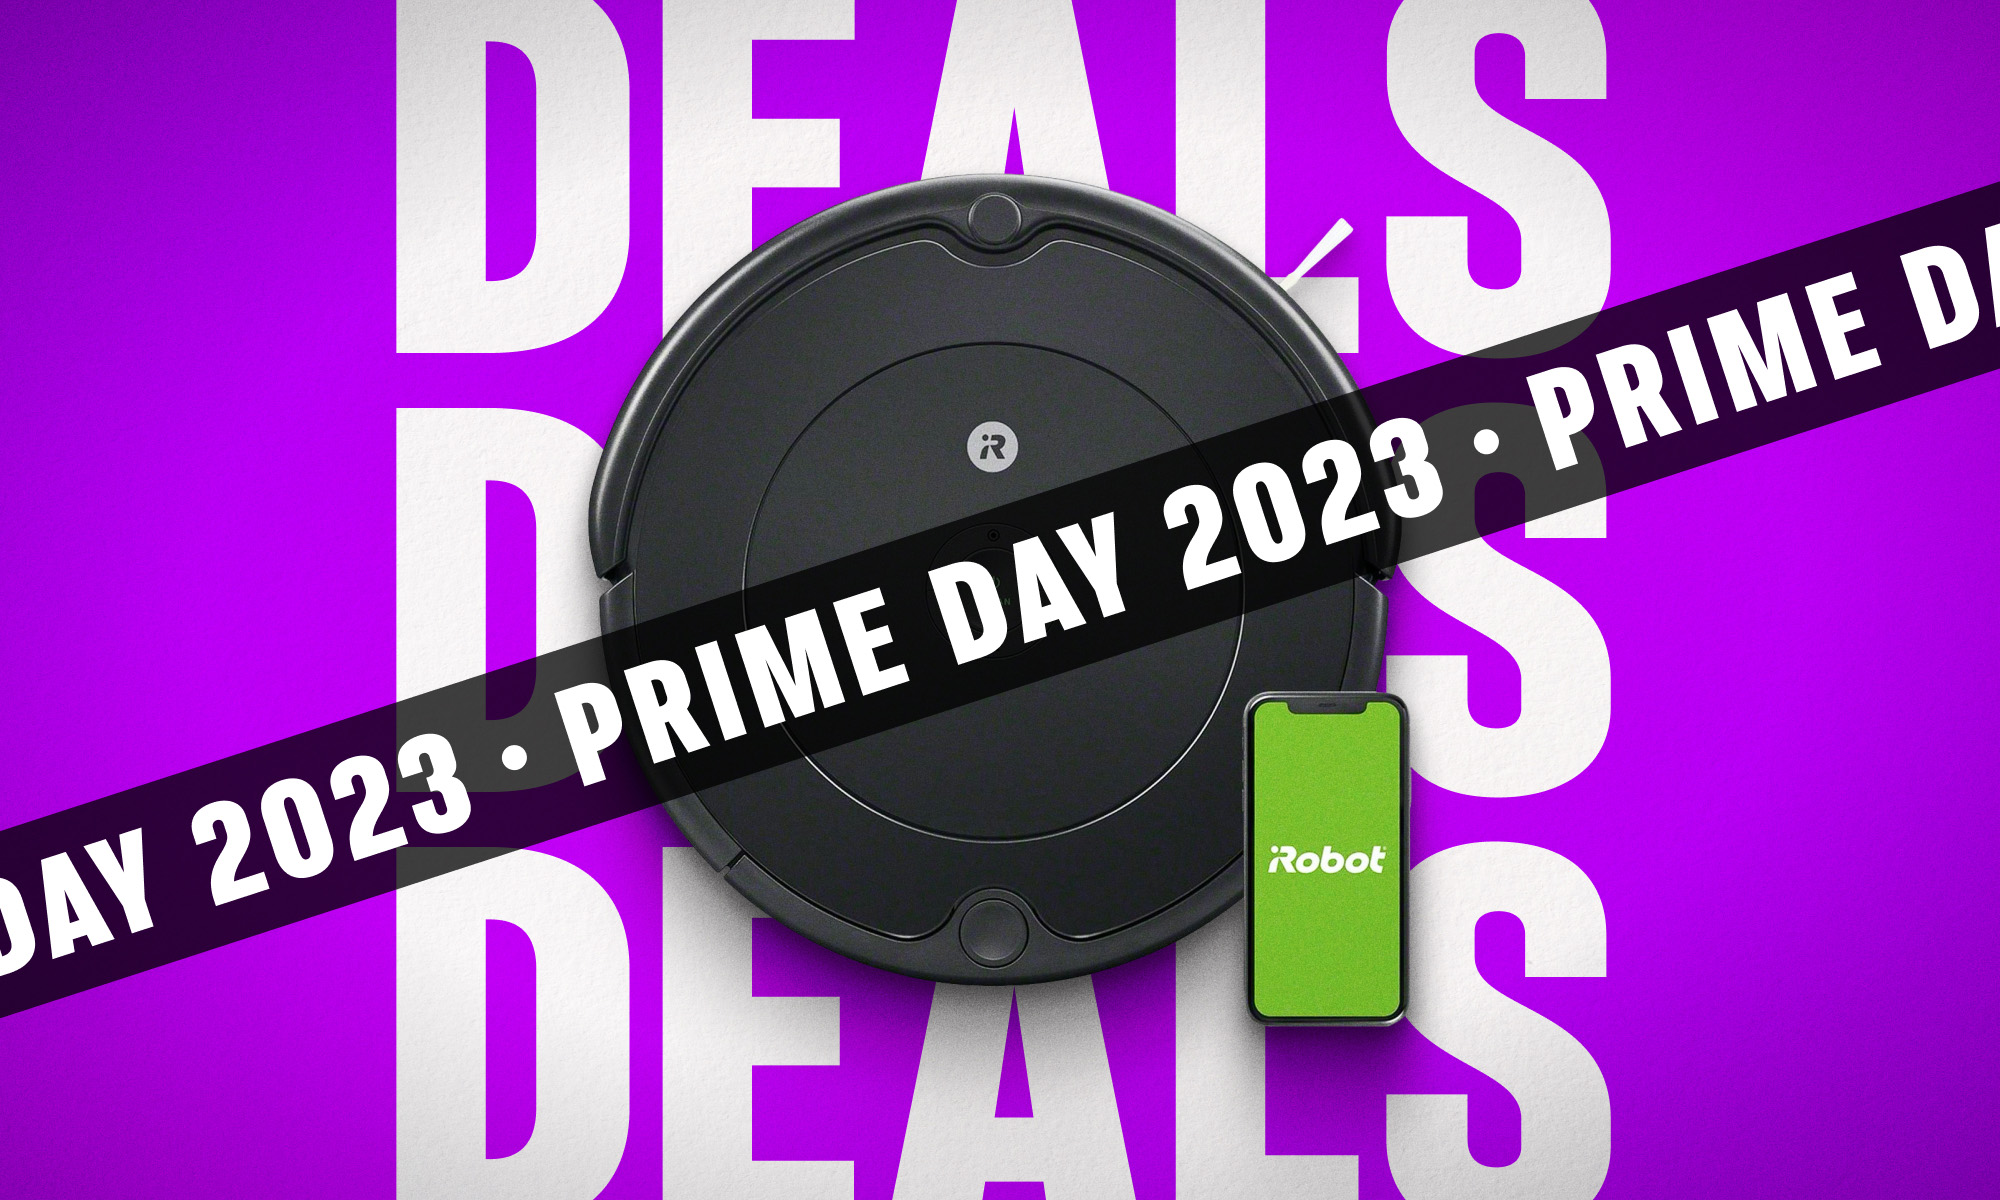 Prime Big Deal Days: 100+ of the best deals you can shop